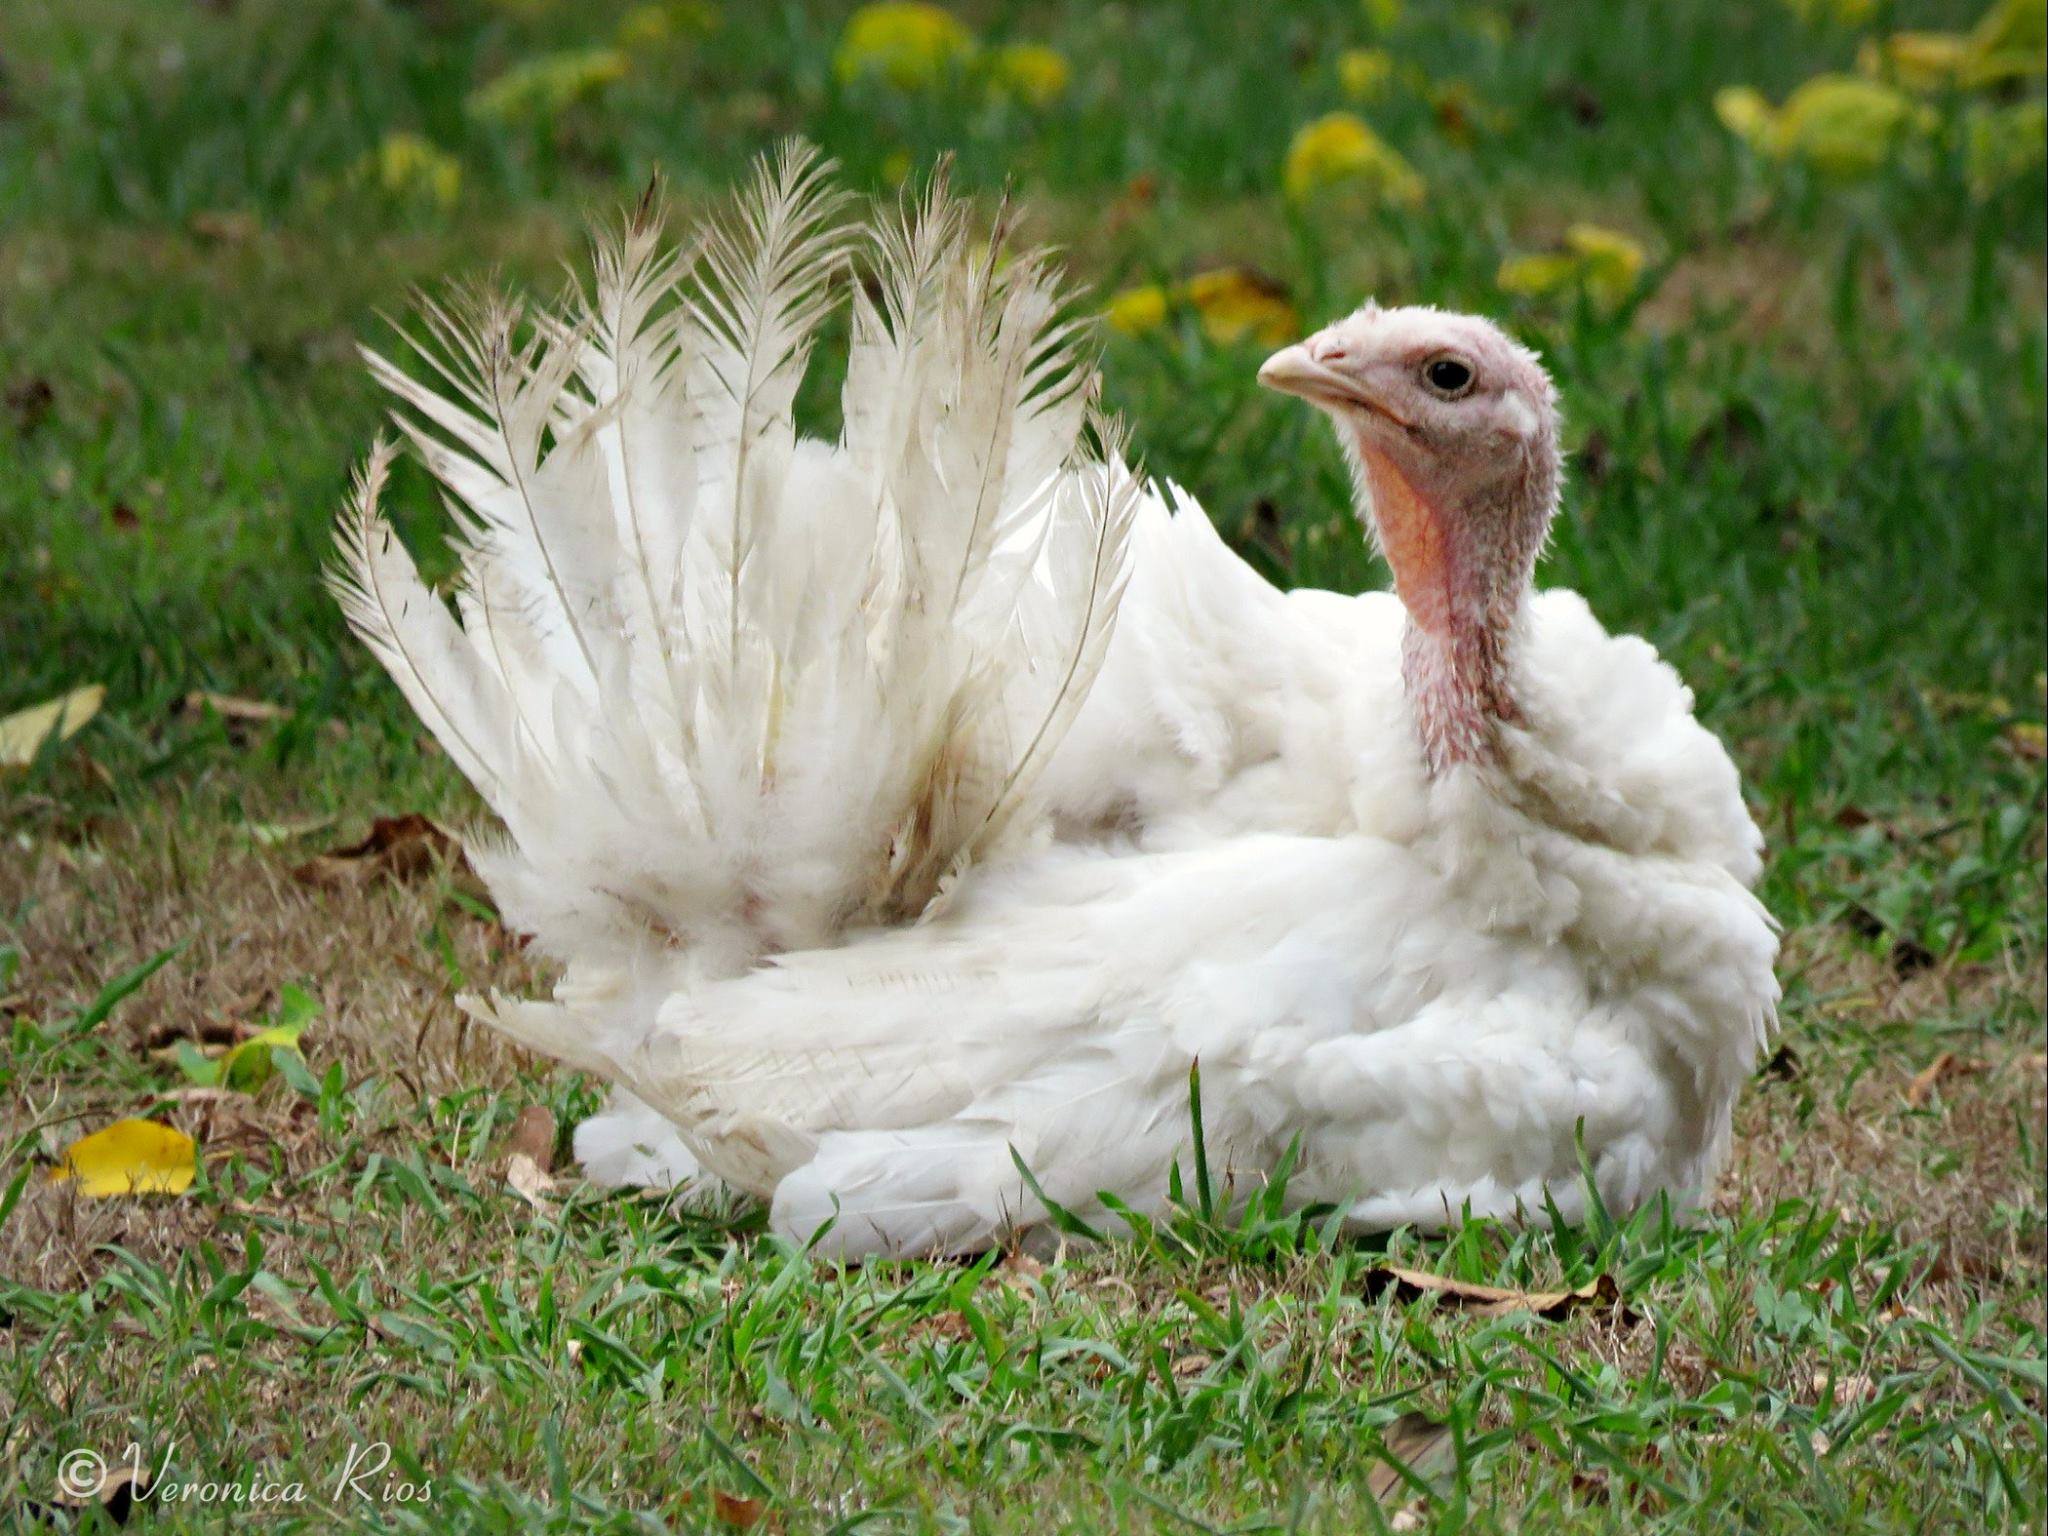 A white turkey called Veronica lying on her side and looking interested in something.